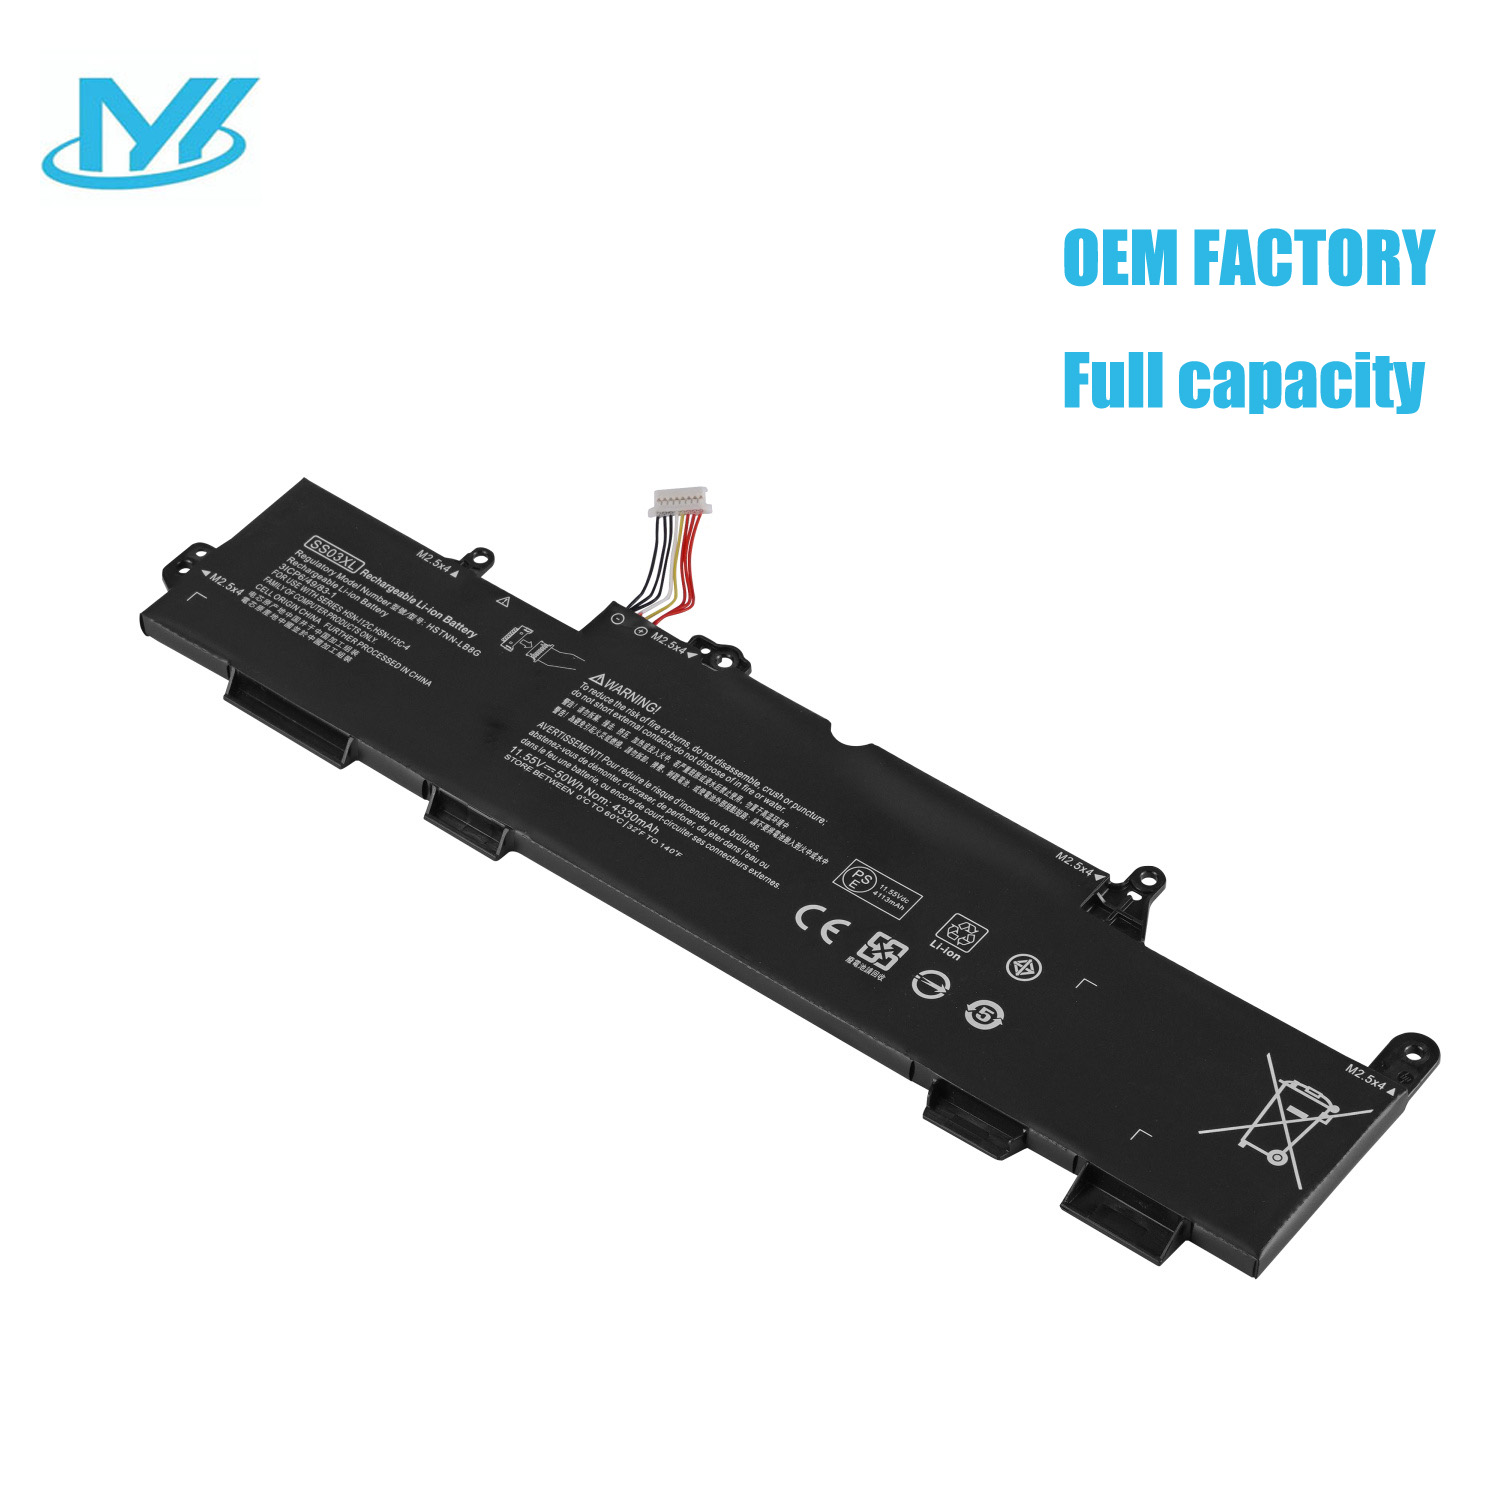 SS03XL rechargeable lithium ion Notebook battery Laptop battery For HP EliteBook 730 745 840 ZBOOK 14U G5 933321-855 11.55V 50Wh 4330mAh 3cell